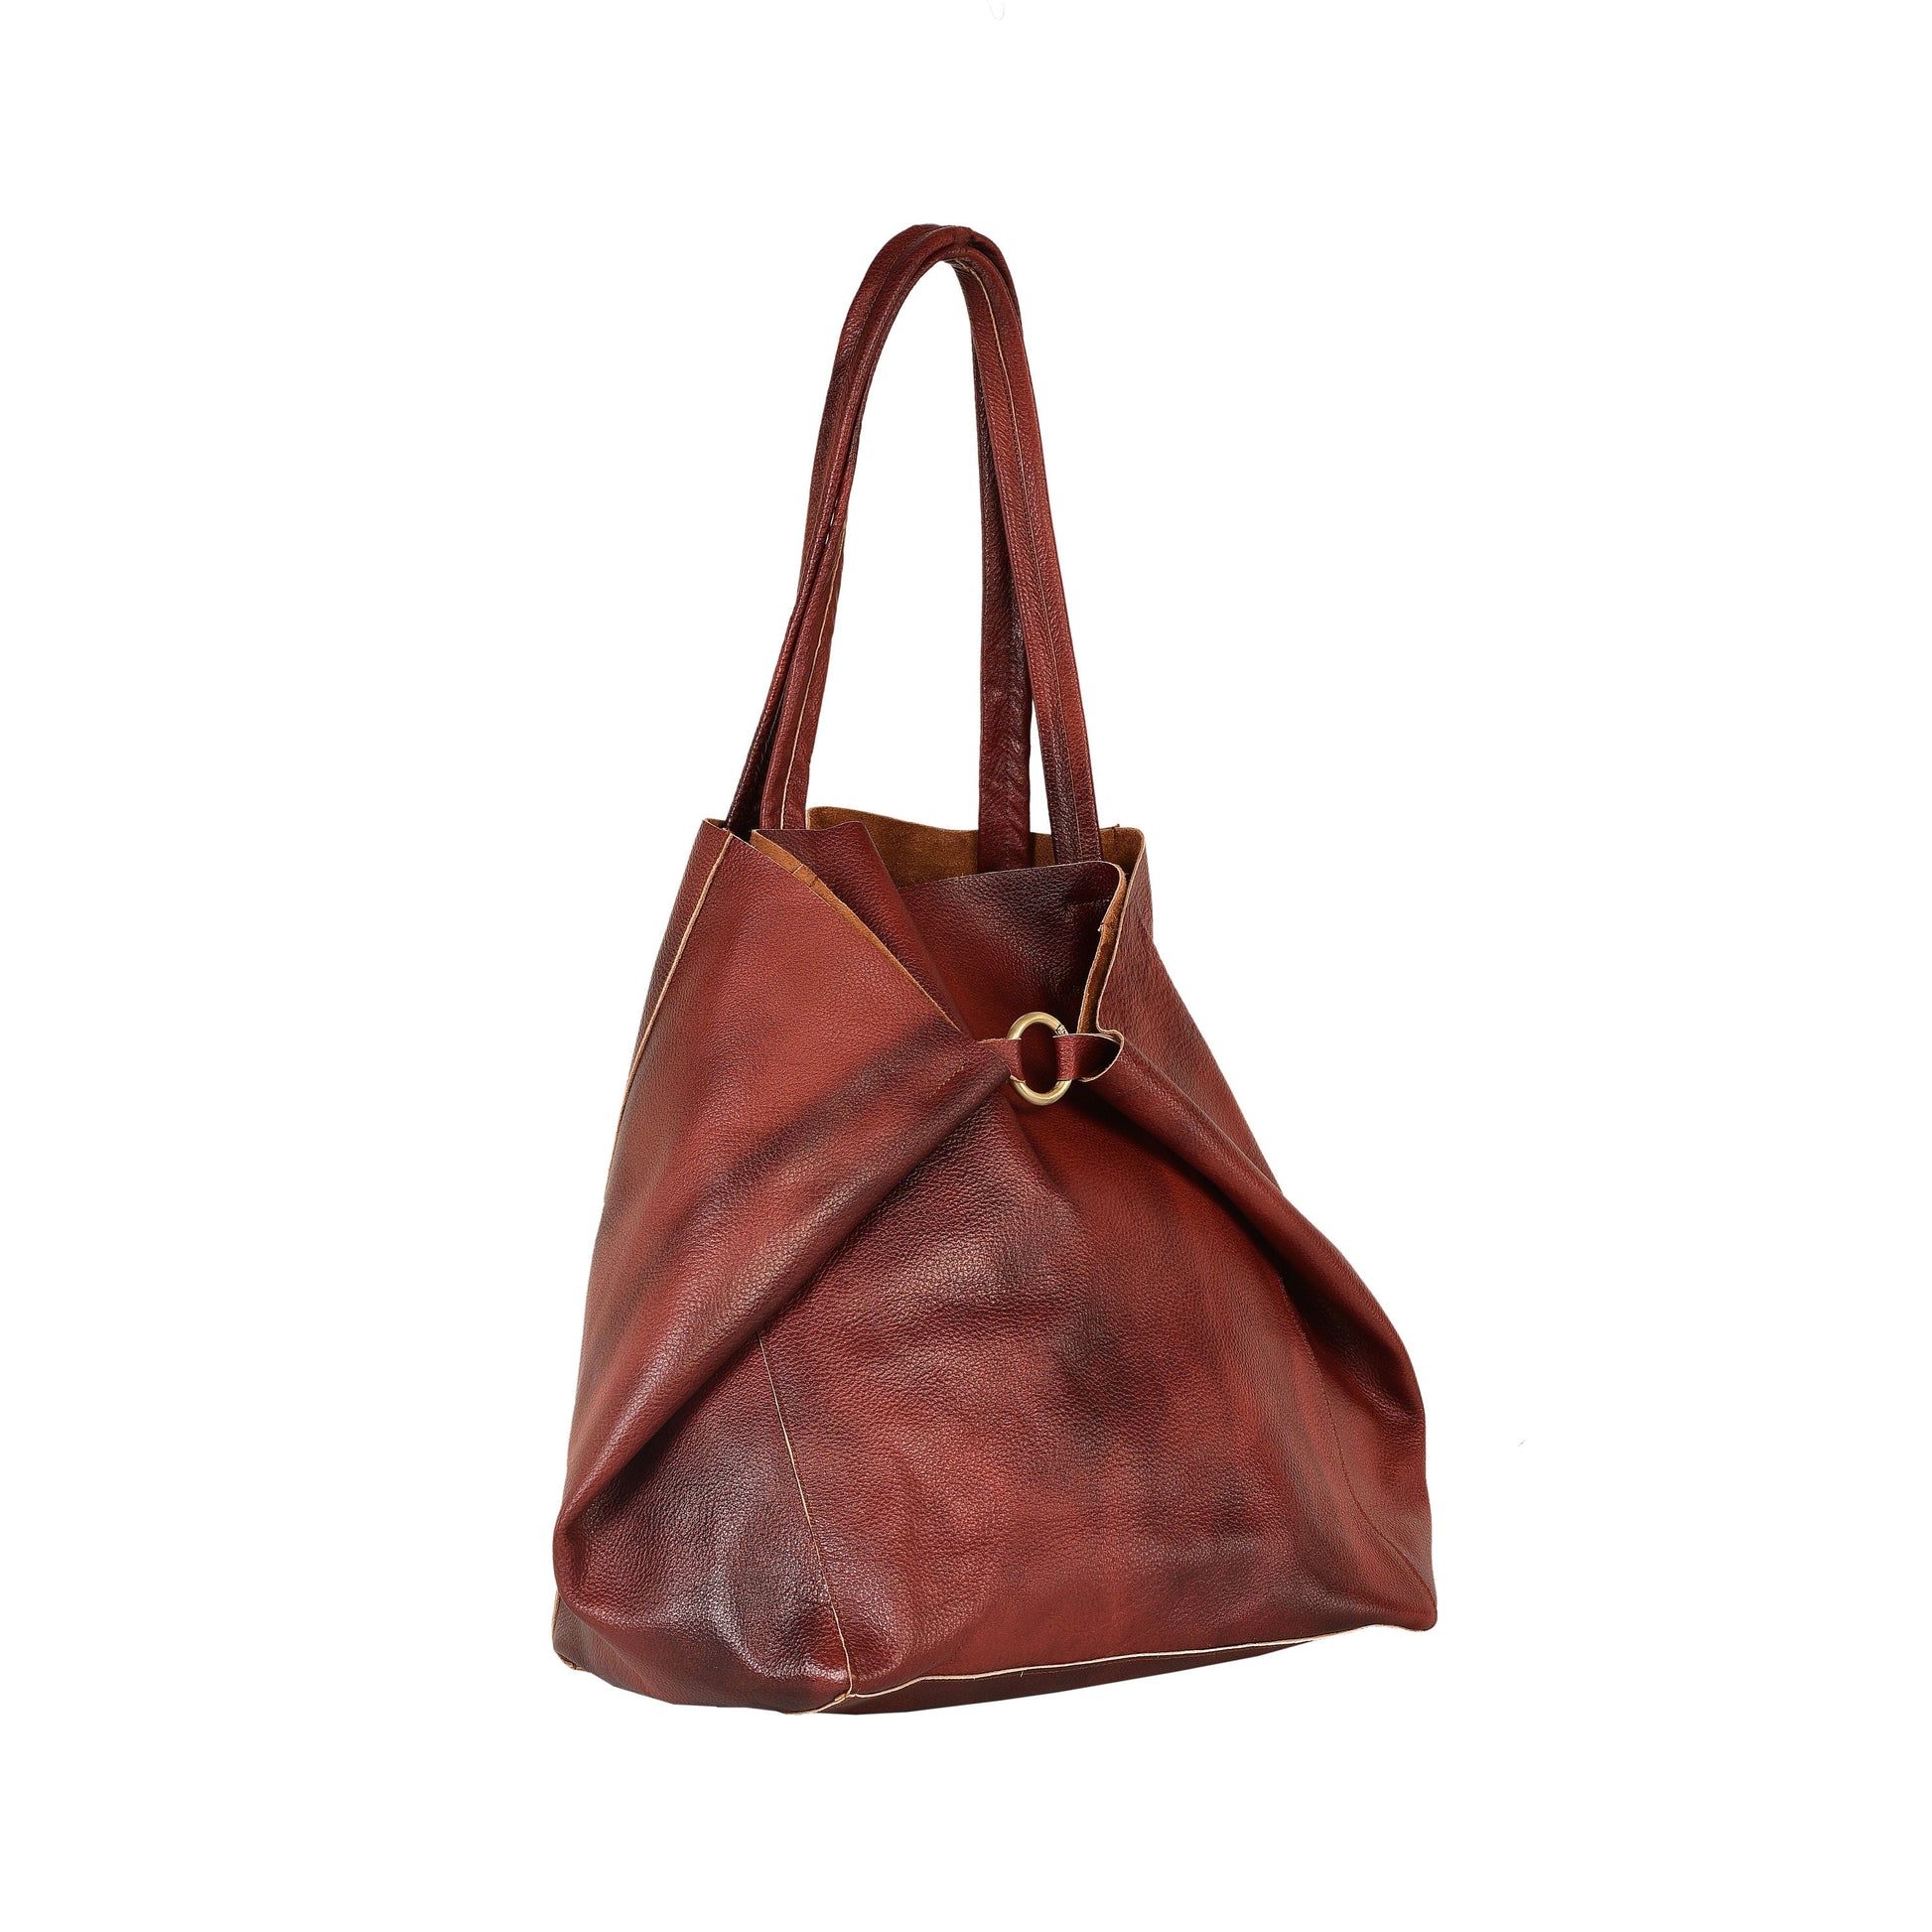 Everyday Large Tote